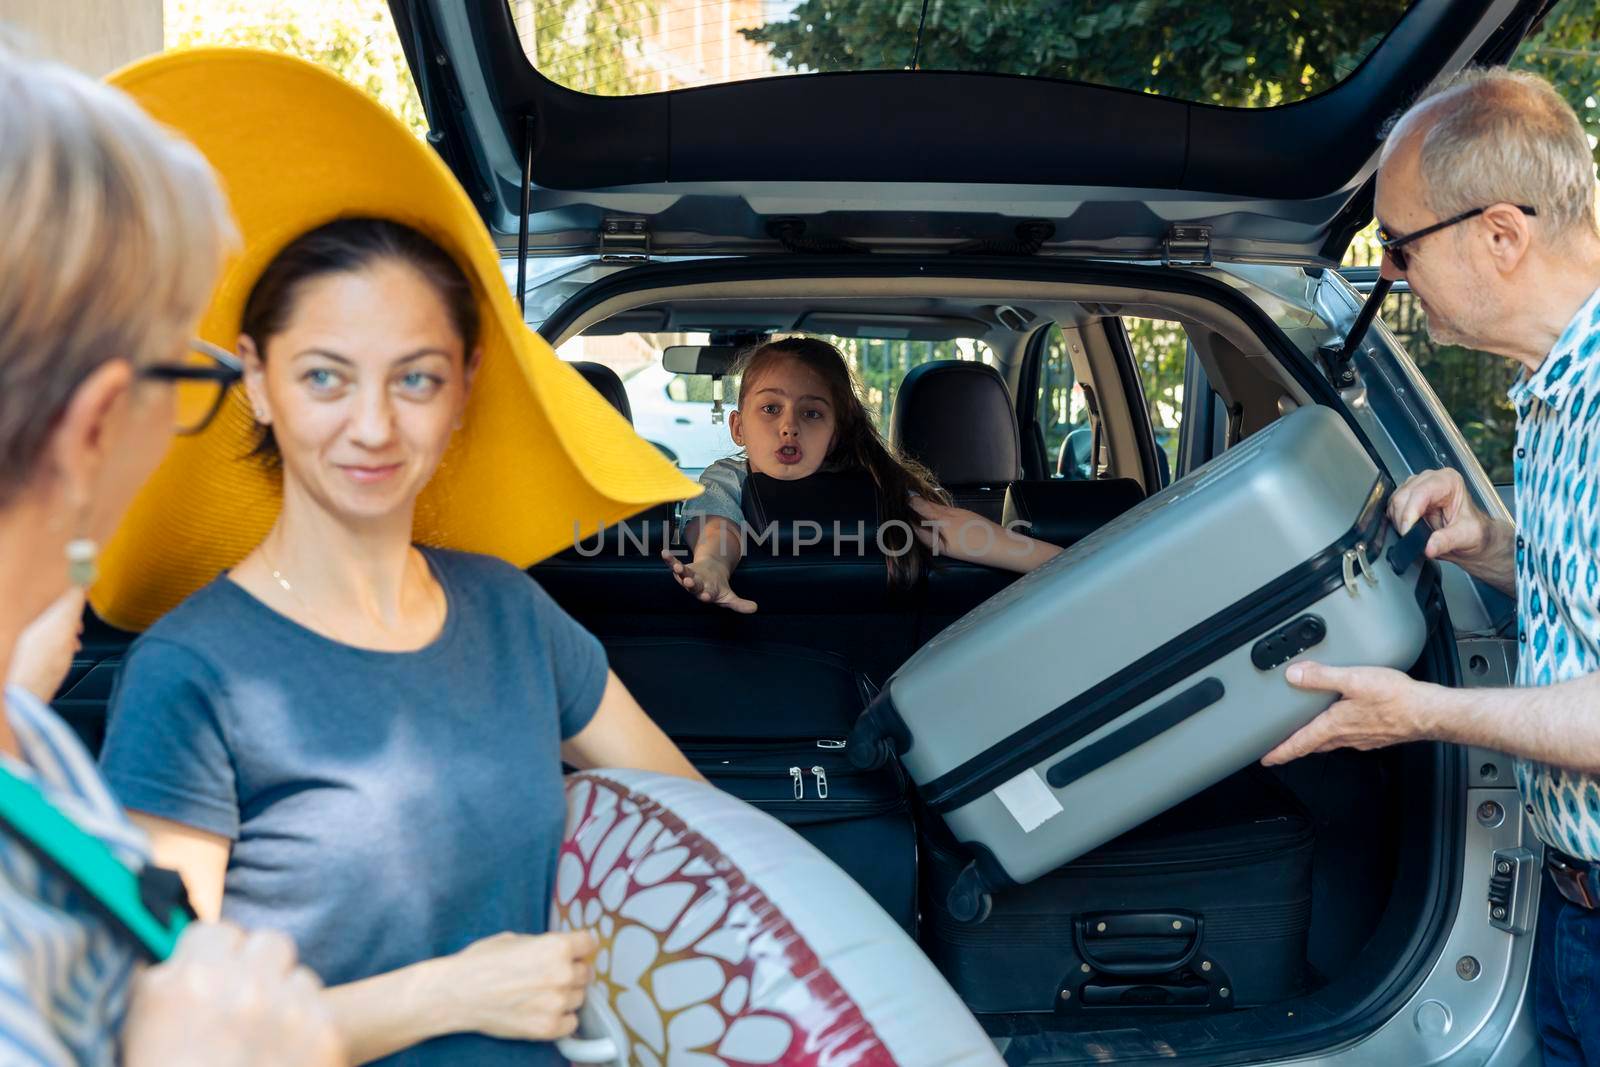 Young child going on vacation with family, preparing to leave on summer holiday at seaside with parents and grandparents. Putting luggage in vehicle trunk to travel to journey destination.